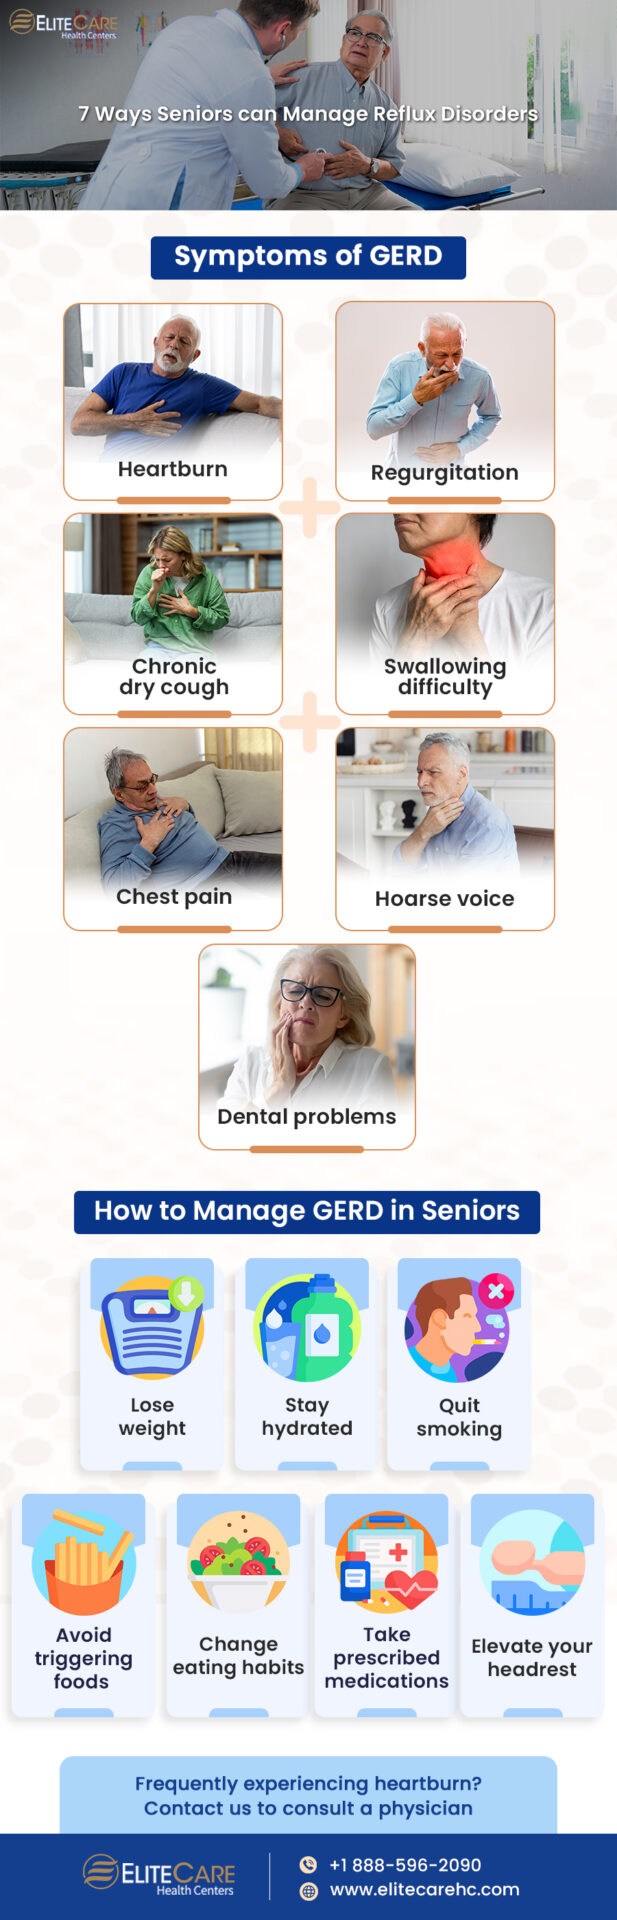 7 Ways Seniors Can Manage Reflux Disorders | Infographic